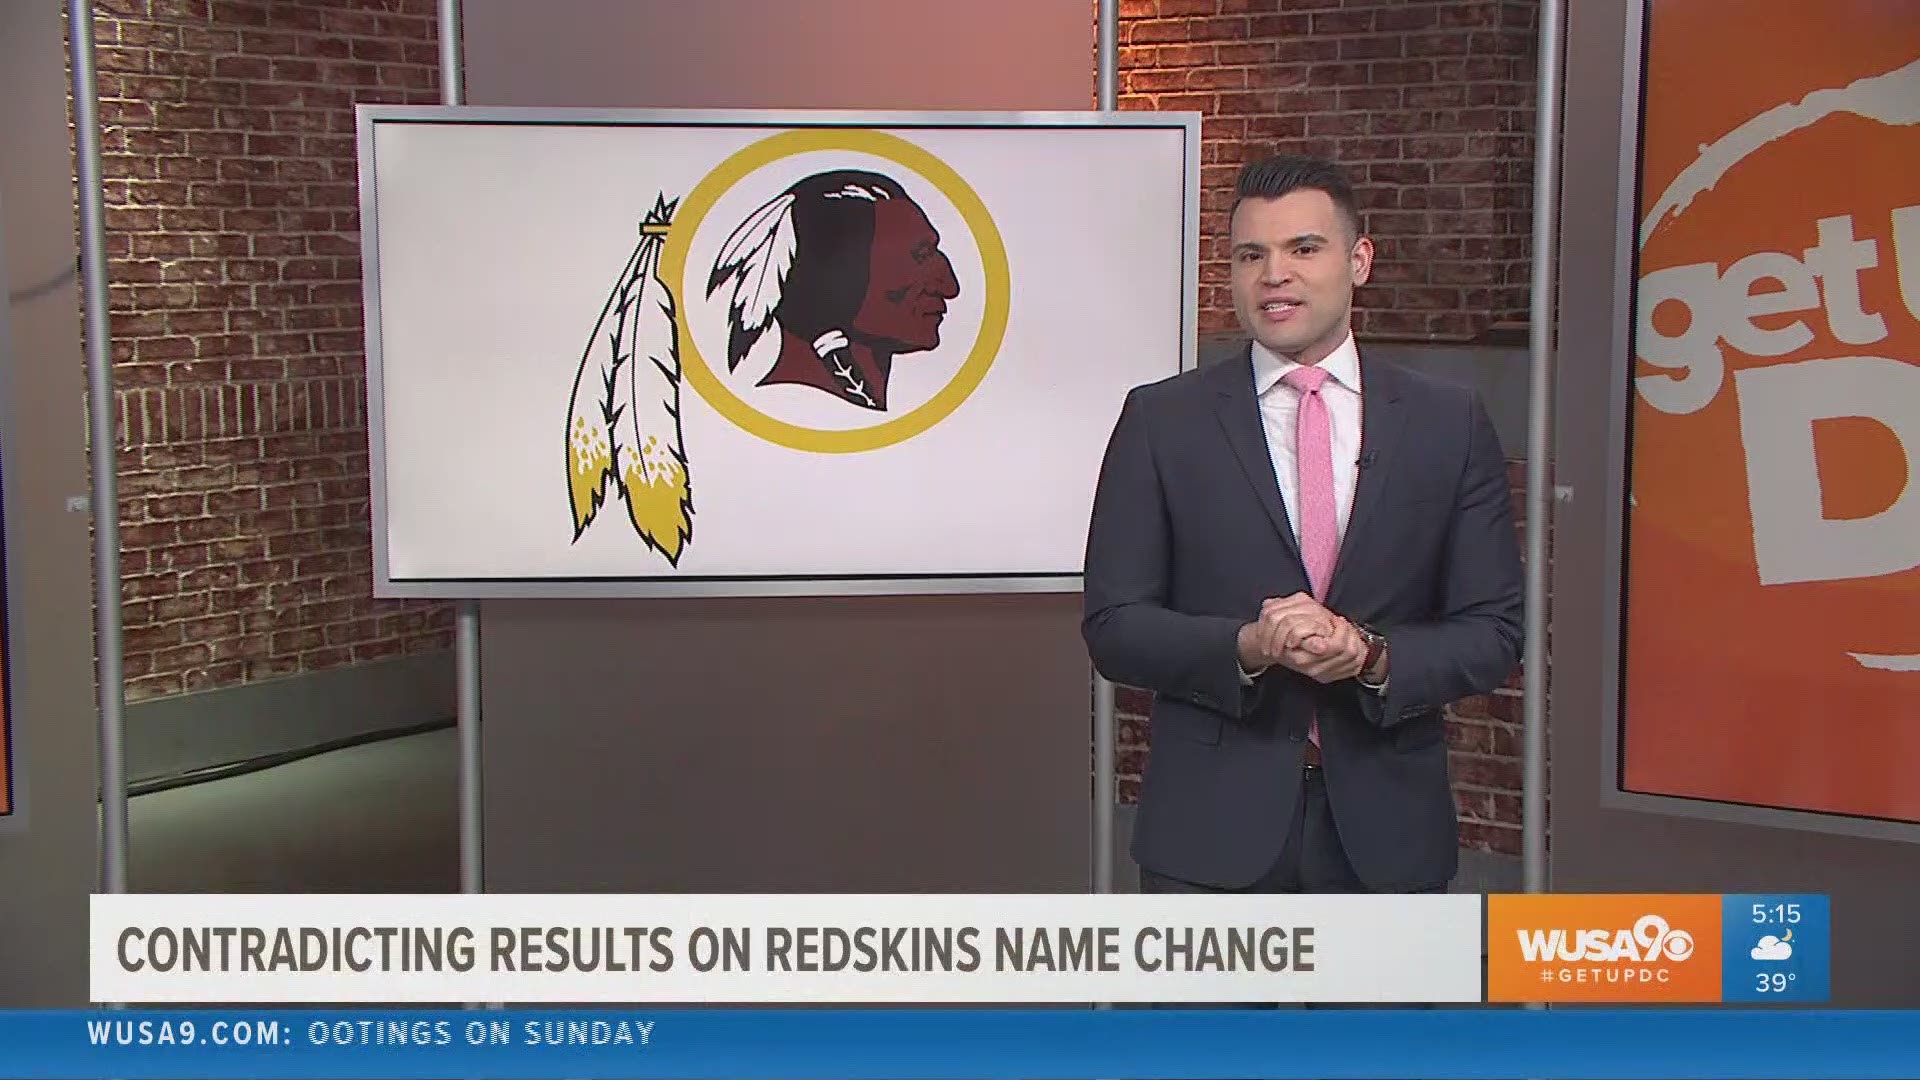 The new UC Berkeley study concludes the majority of Native Americans are offended by the Redskins name, contrary to previous poll results.